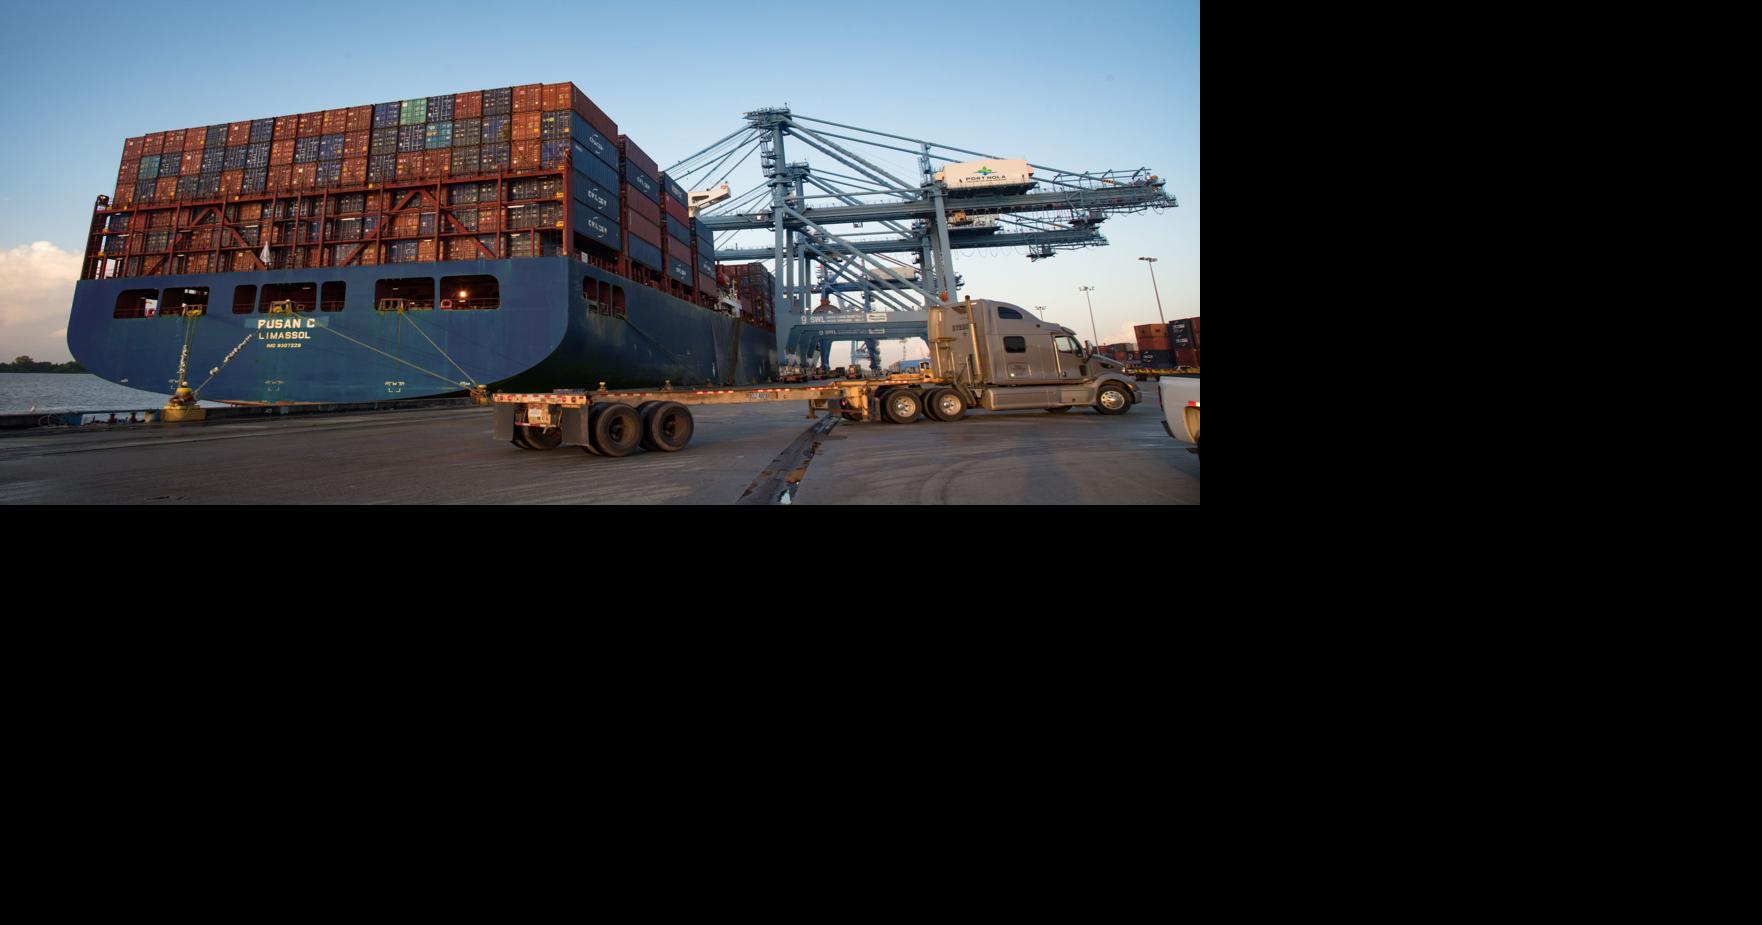 Louisiana’s ports have lost ground to other states. Can a new plan get them working together?